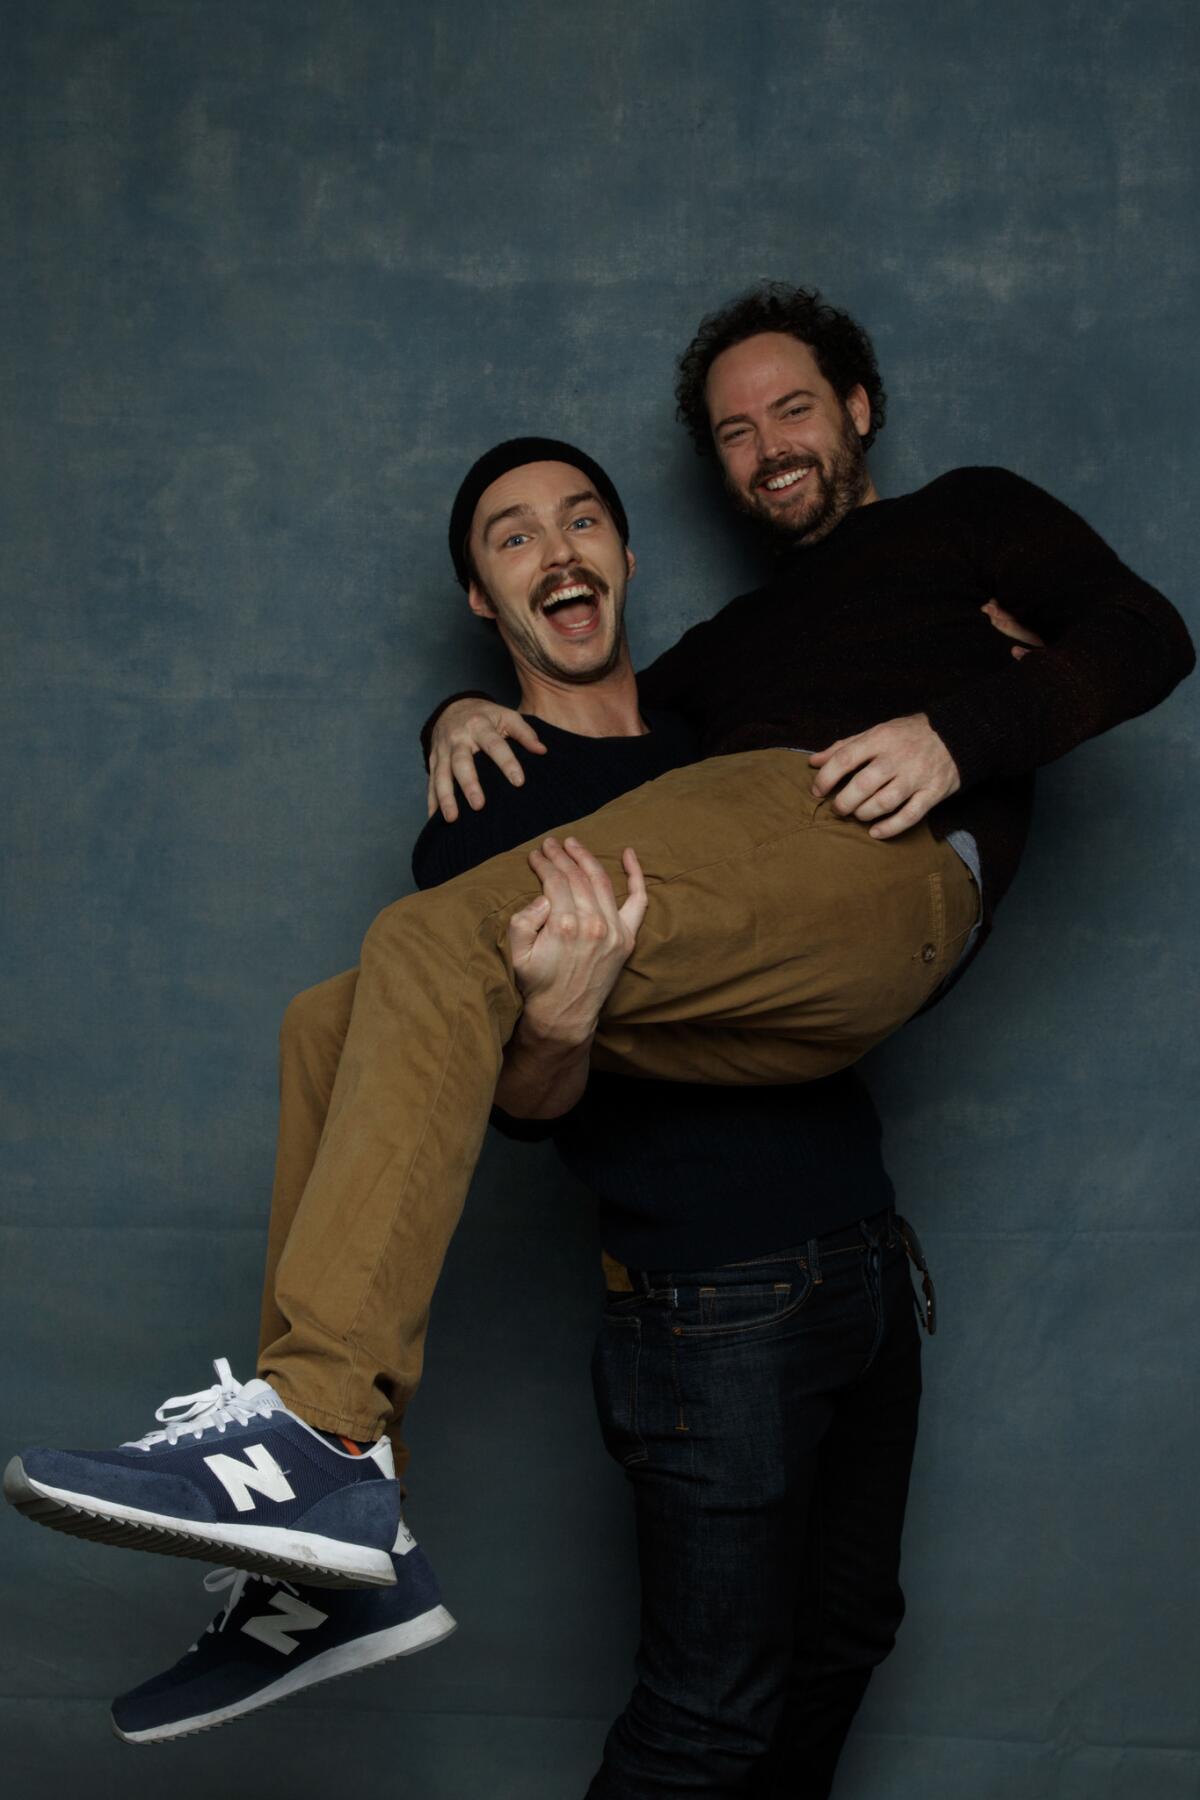 Actor Nicholas Hoult and director Drake Doremus from the film "Newness."